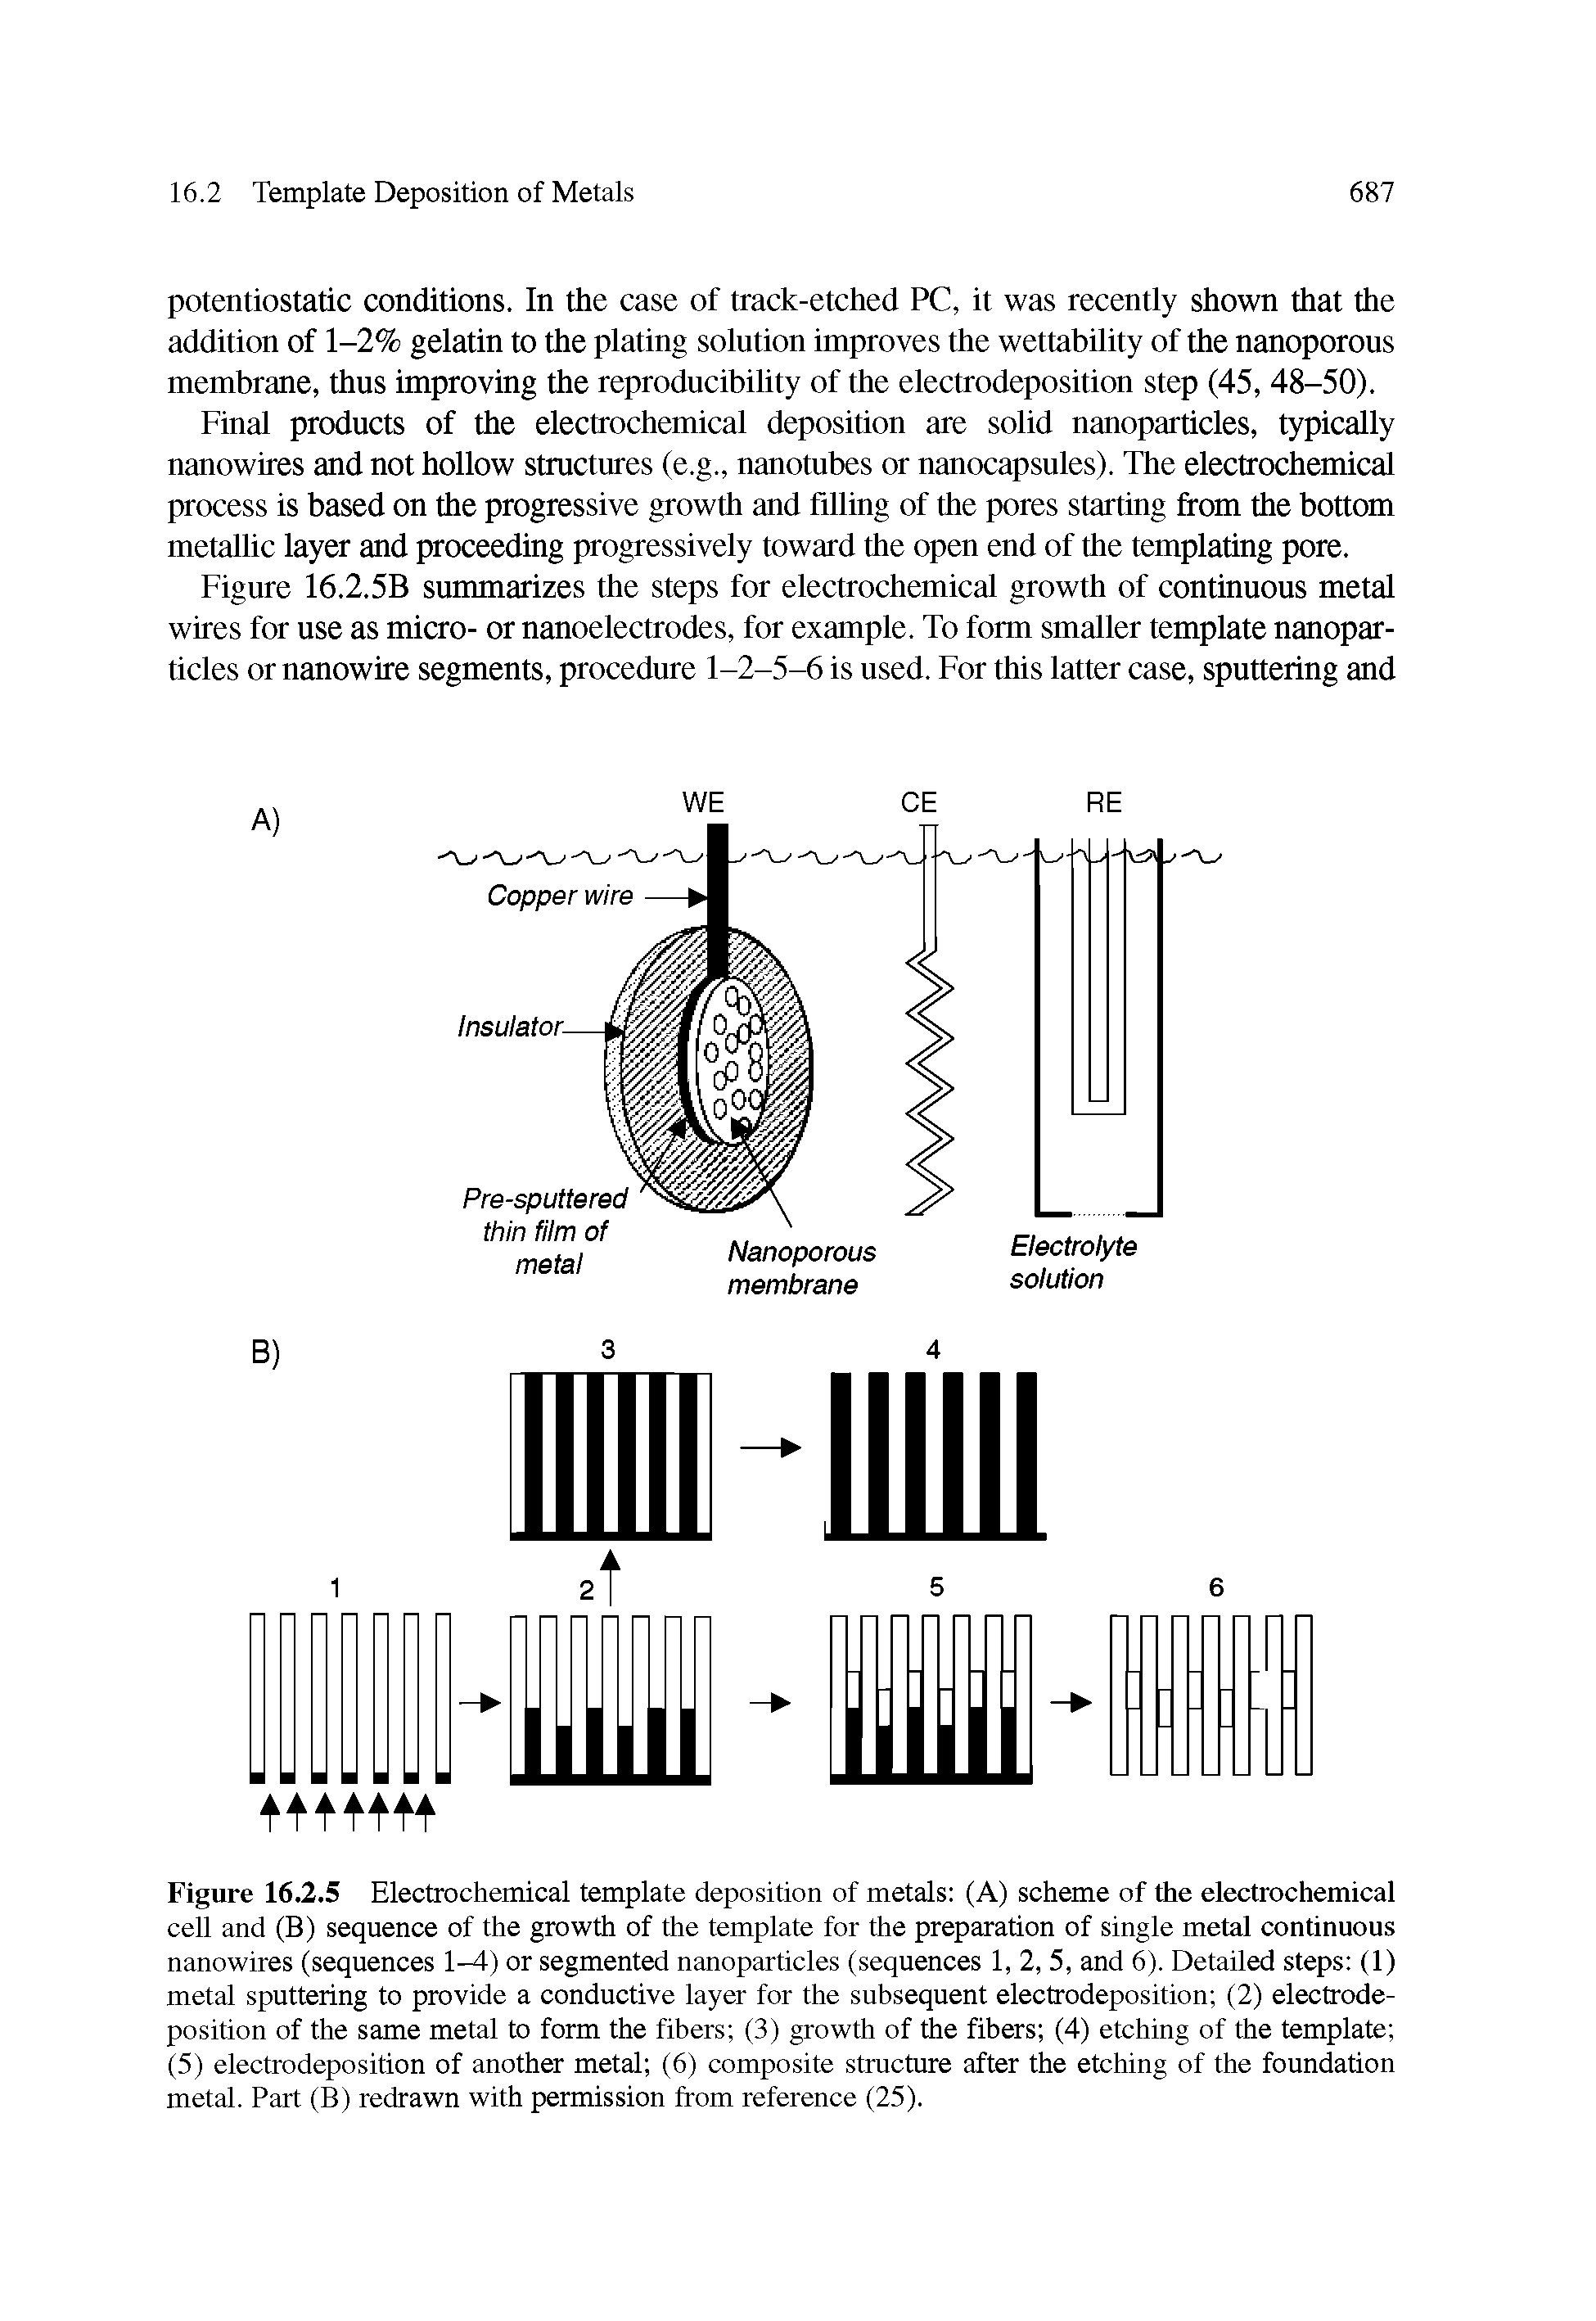 Figure 16.2.5 Electrochemical template deposition of metals (A) scheme of the electrochemical cell and (B) sequence of the growth of the template for the preparation of single metal continuous nanowires (sequences 1-4) or segmented nanoparticles (sequences 1, 2, 5, and 6). Detailed steps (1) metal sputtering to provide a conductive layer for the subsequent electrodeposition (2) electrodeposition of the same metal to form the fibers (3) growth of the fibers (4) etching of the template (5) electrodeposition of another metal (6) composite structure after the etching of the foundation metal. Part (B) redrawn with permission from reference (25).